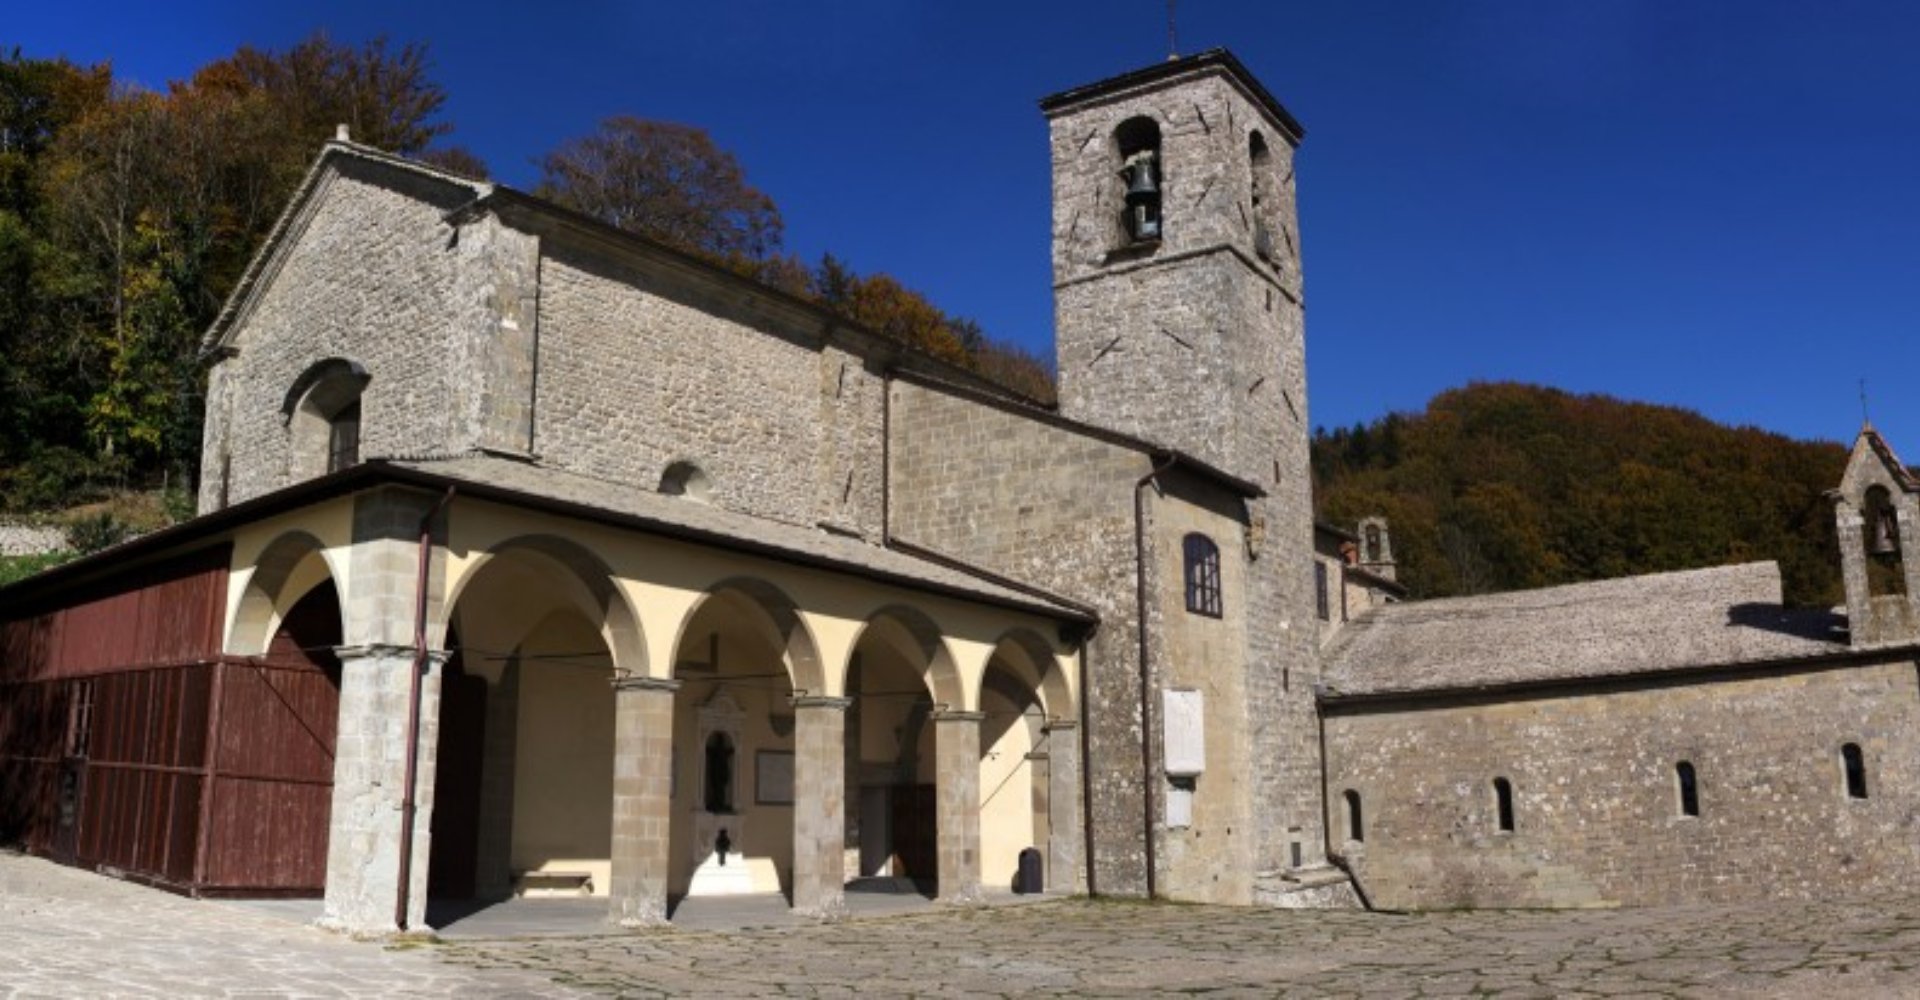 A panoramic view of the Sanctuary of La Verna